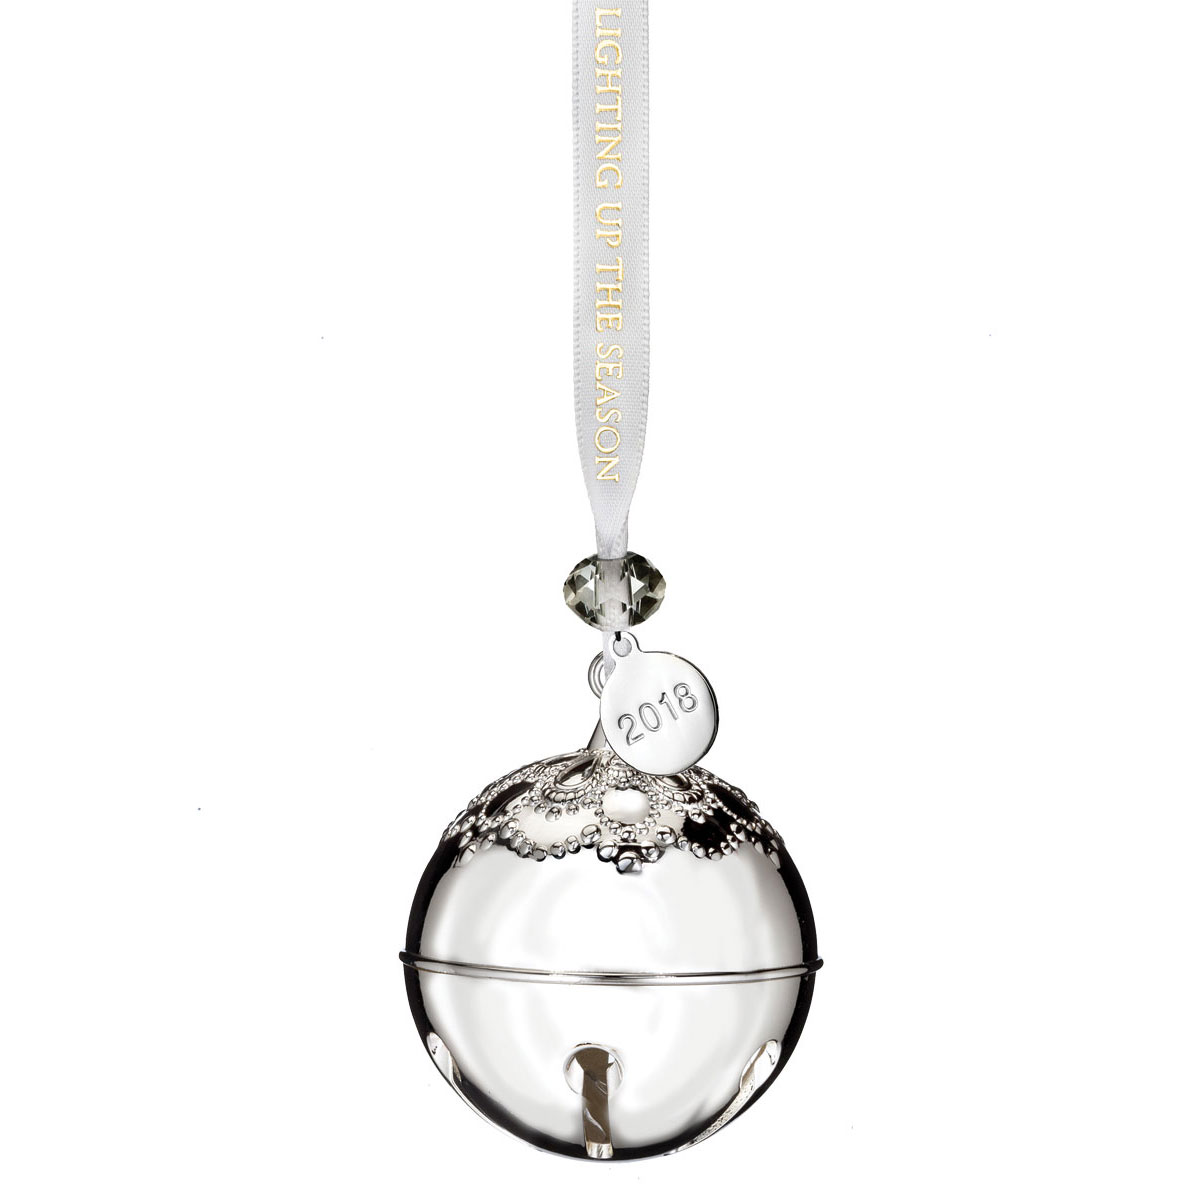 Waterford 2018 Silver Dated Bell Christmas Ornament